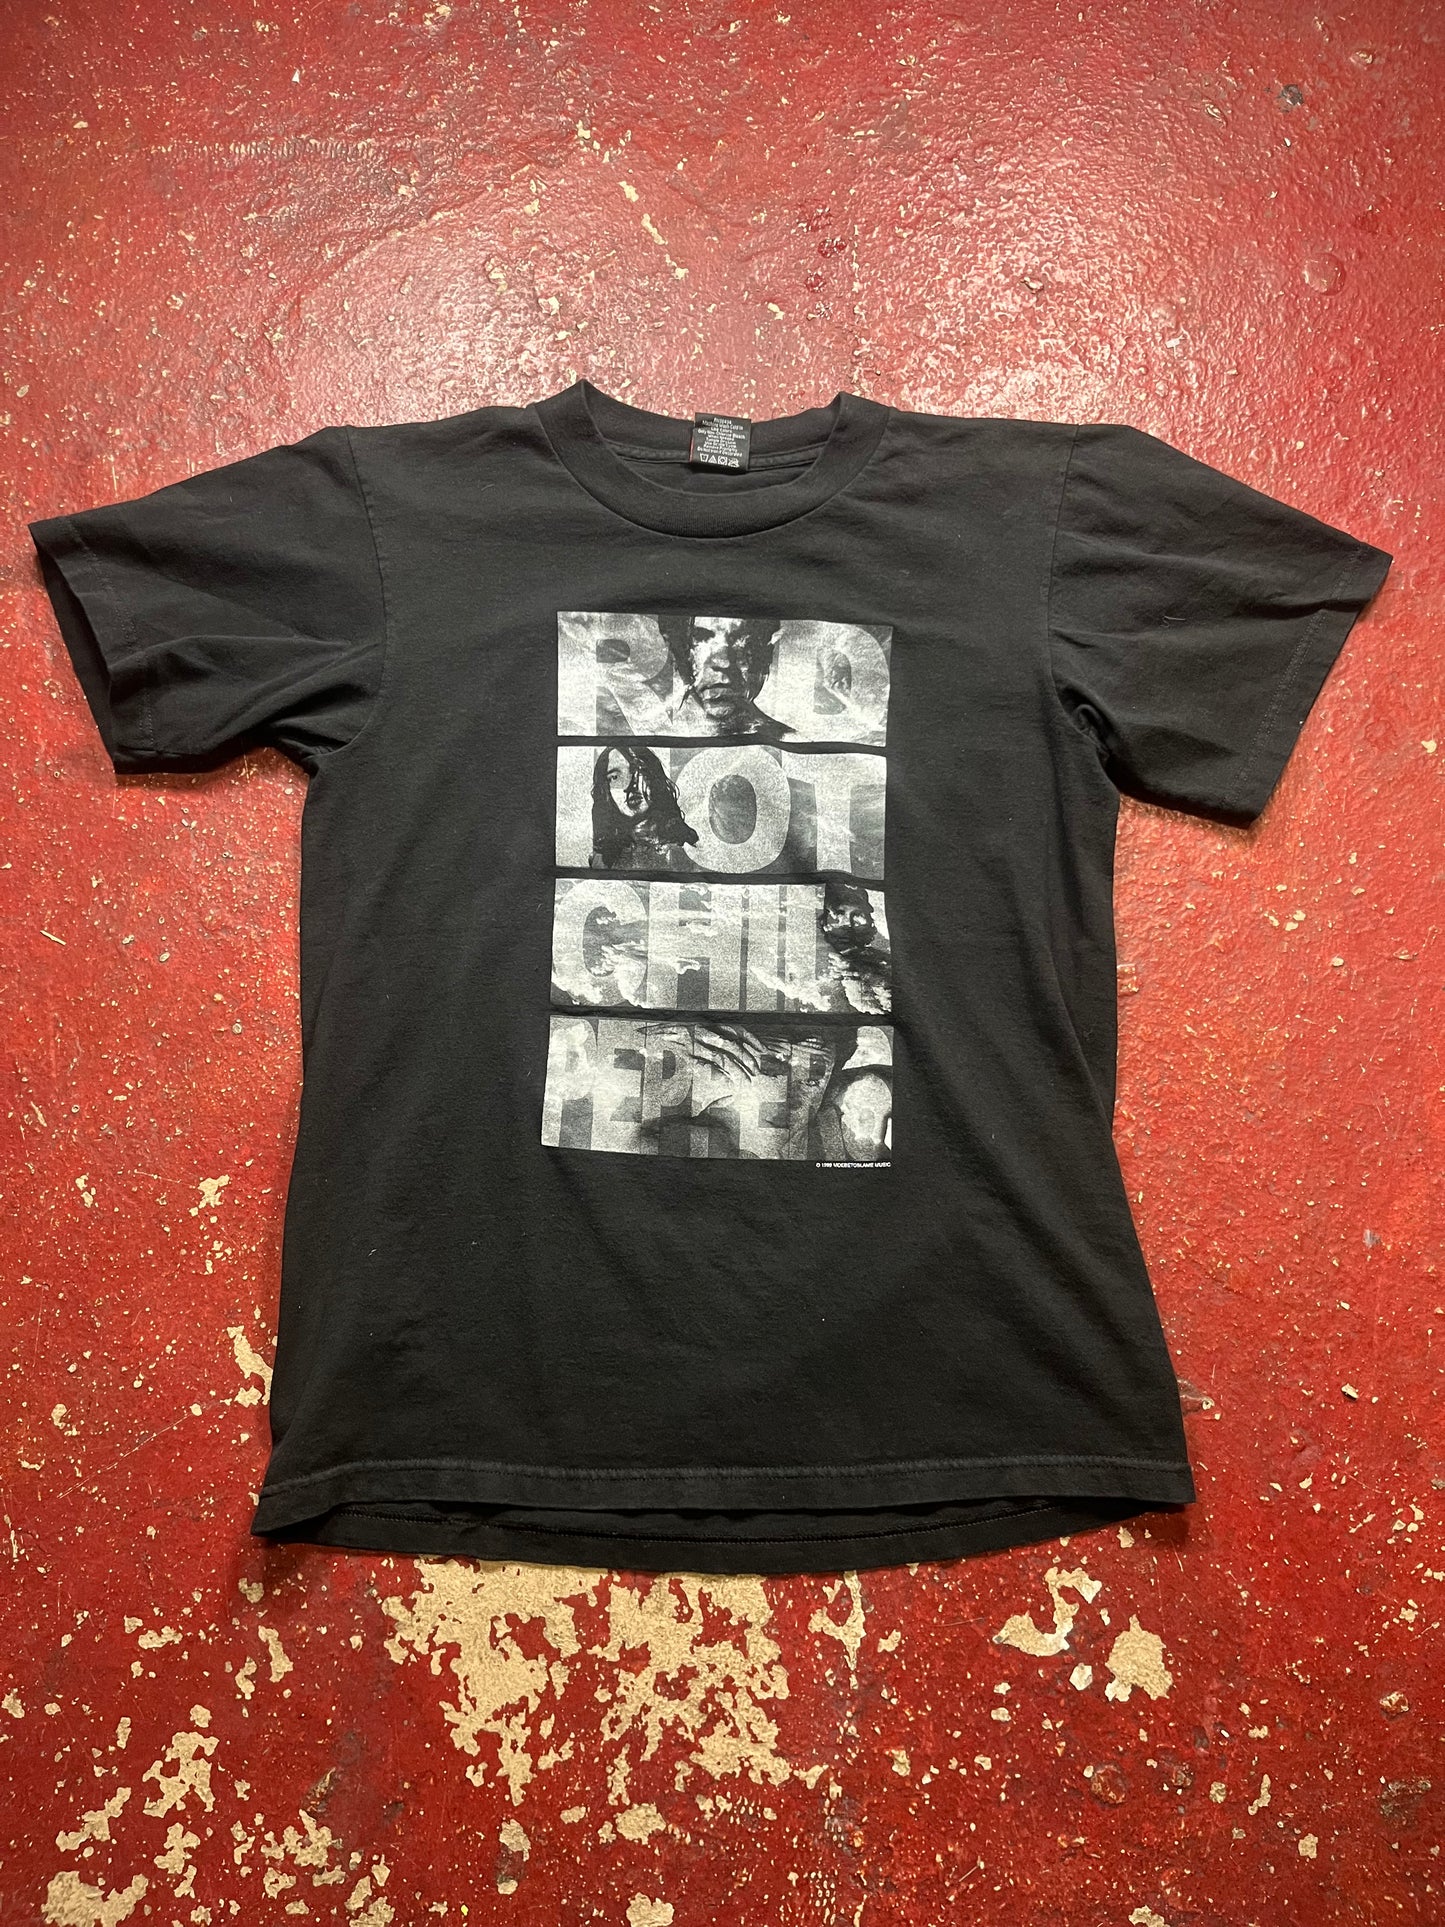 1999 Red Hot Chili Peppers “Californication” Tee